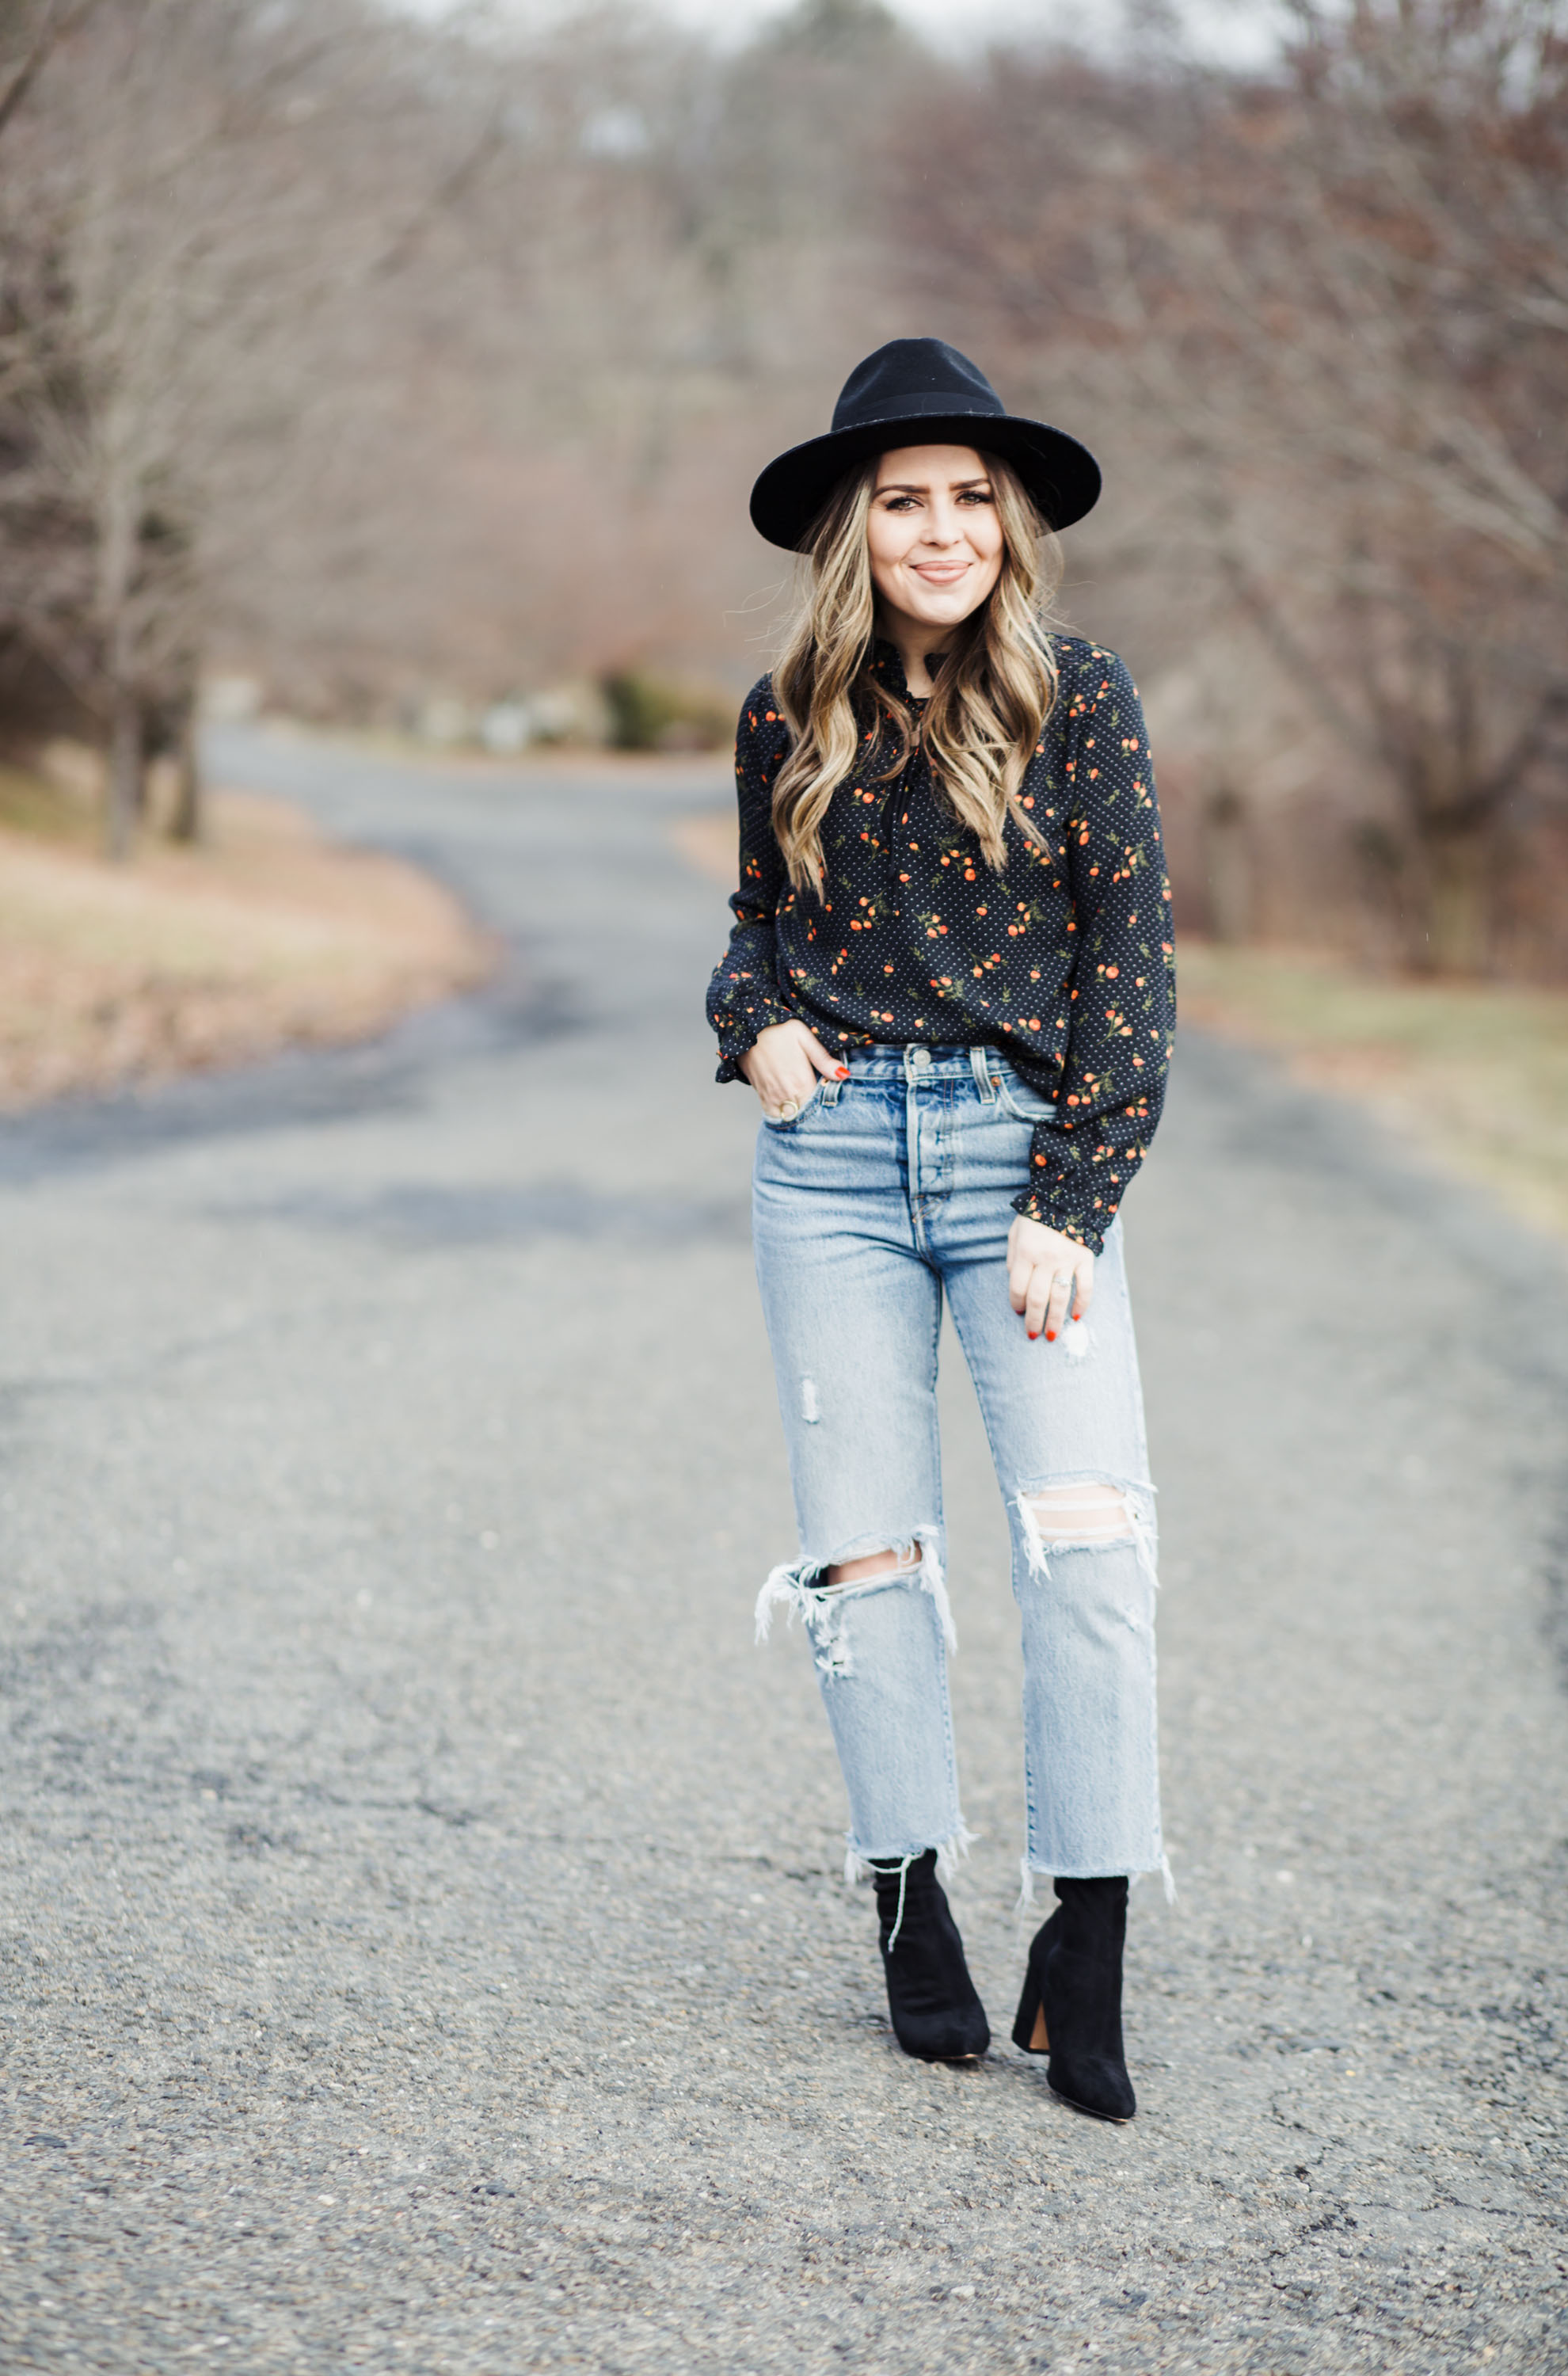 Sock Boots Outfit: All the Stylish Ways to Wear Sock Boots